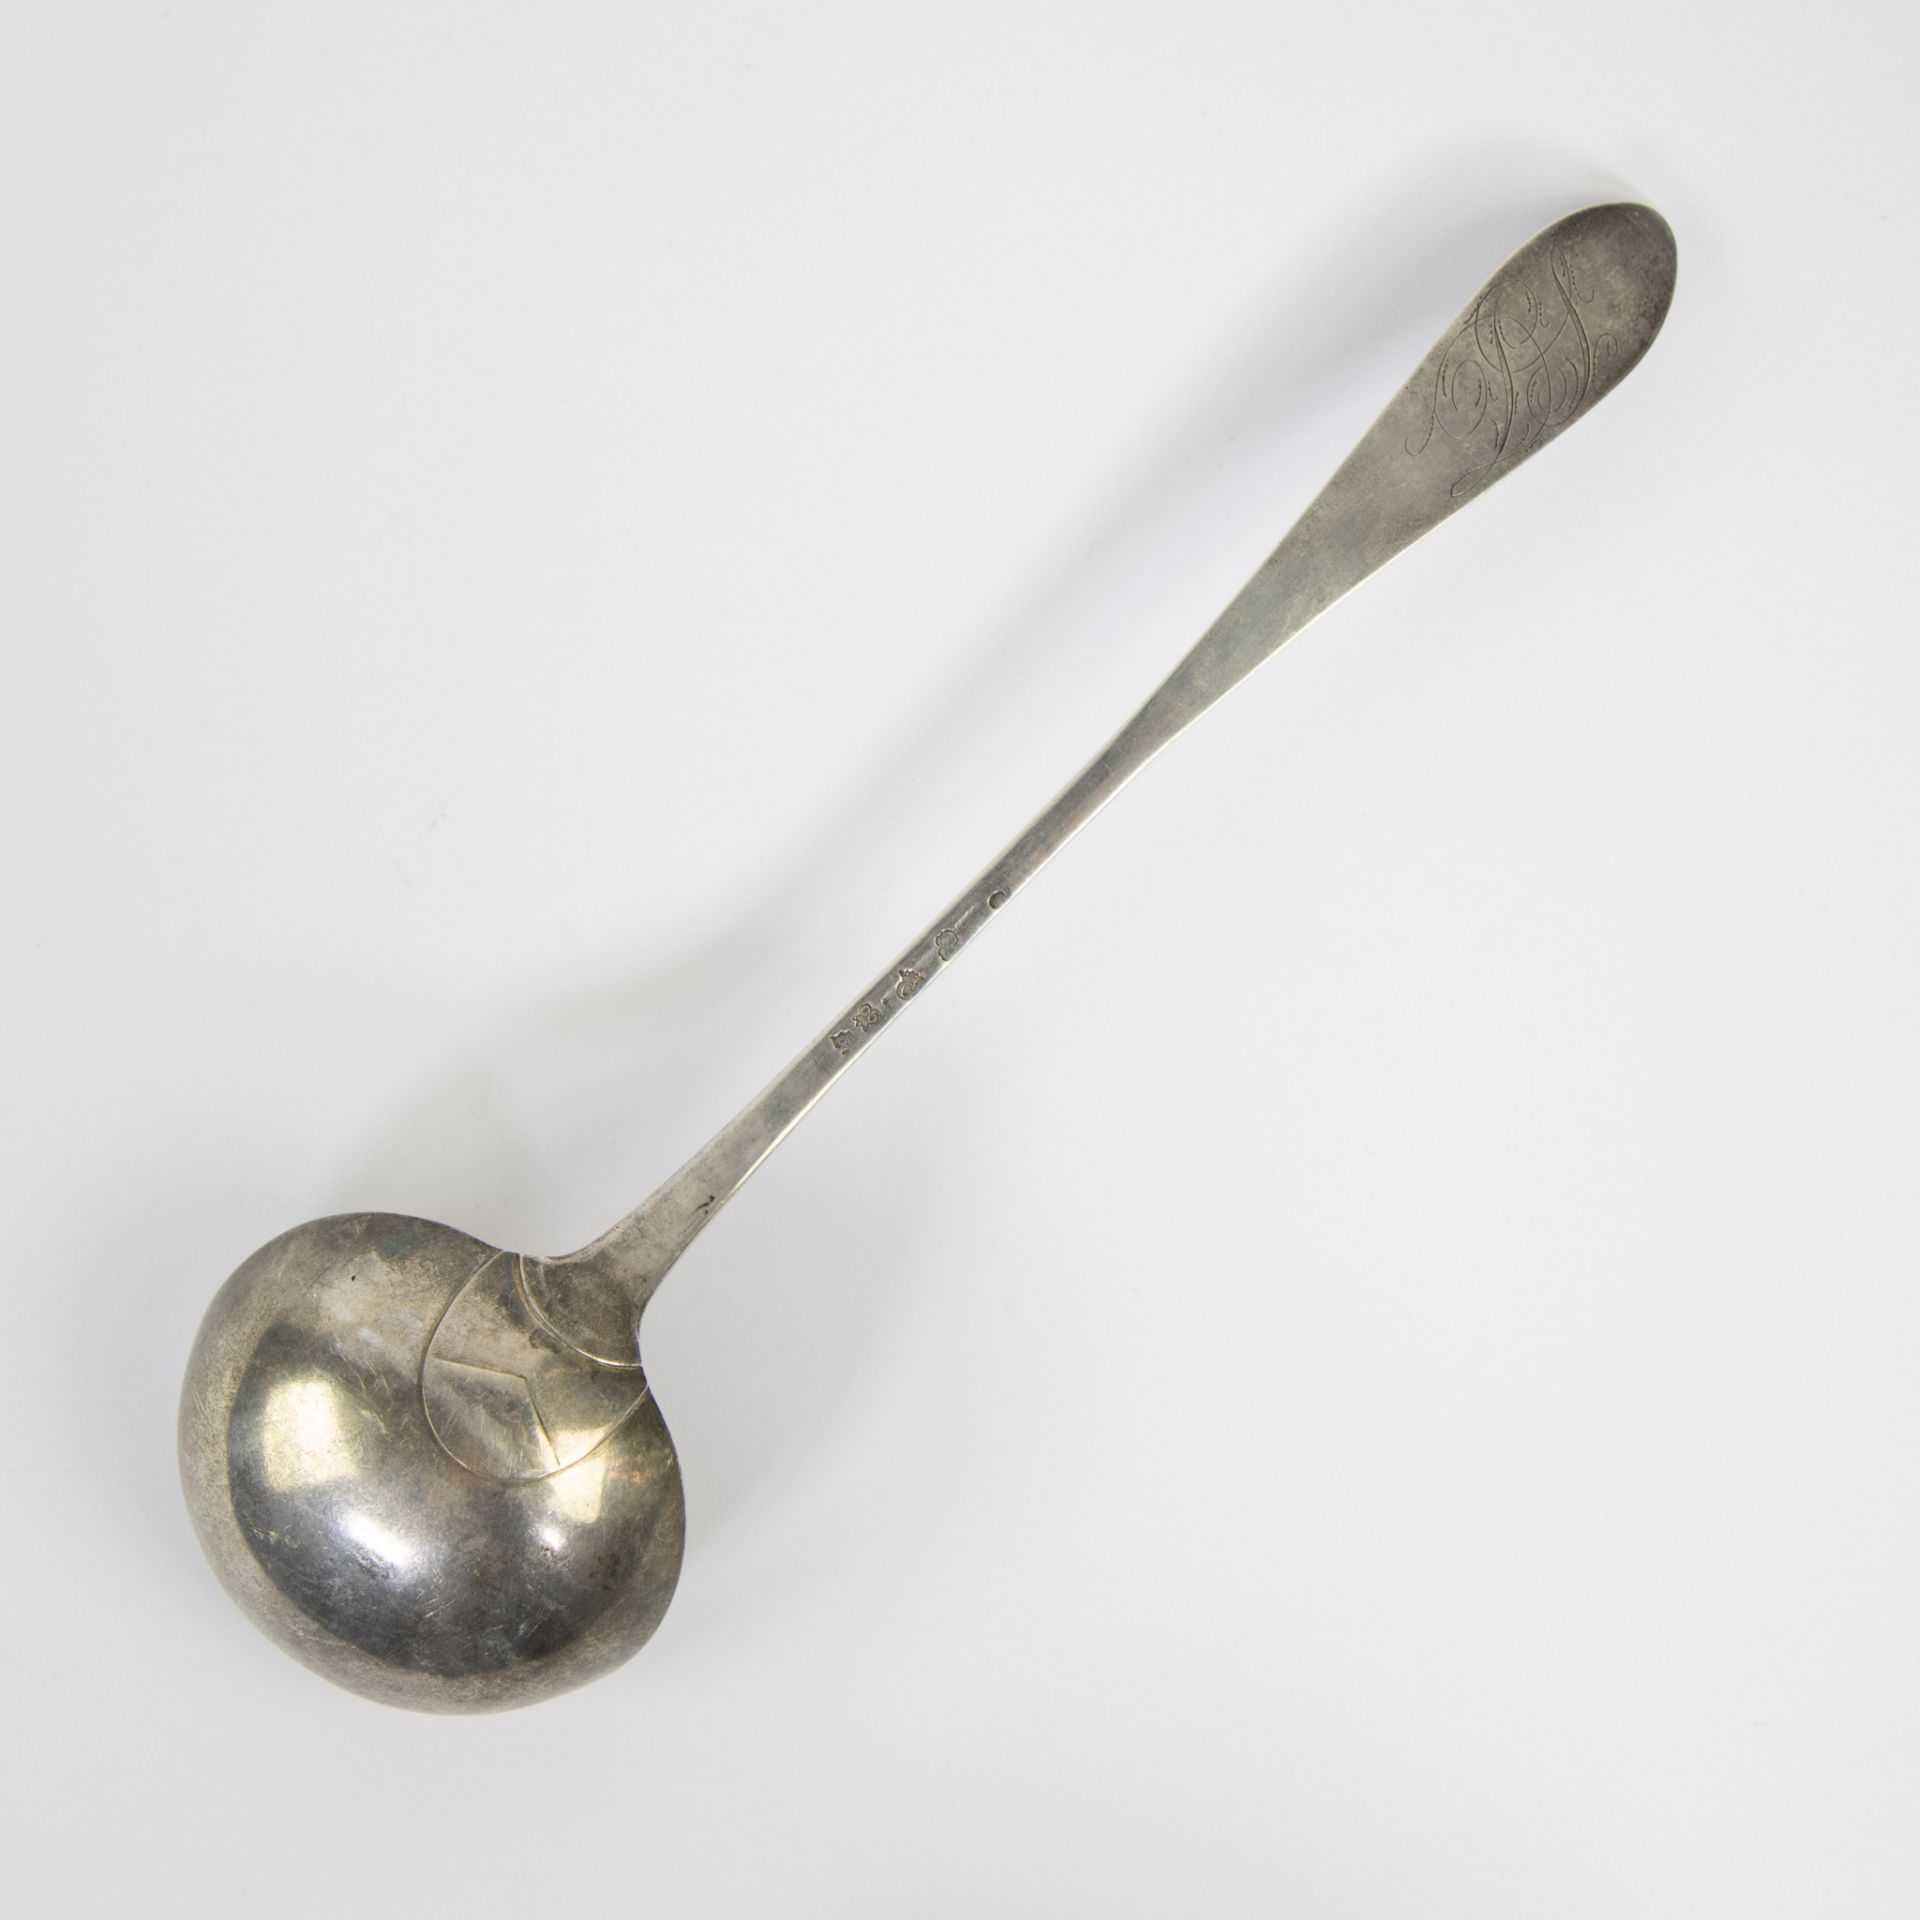 Silver soup spoon, Ghent 1790, Pieter Collé - Image 2 of 5